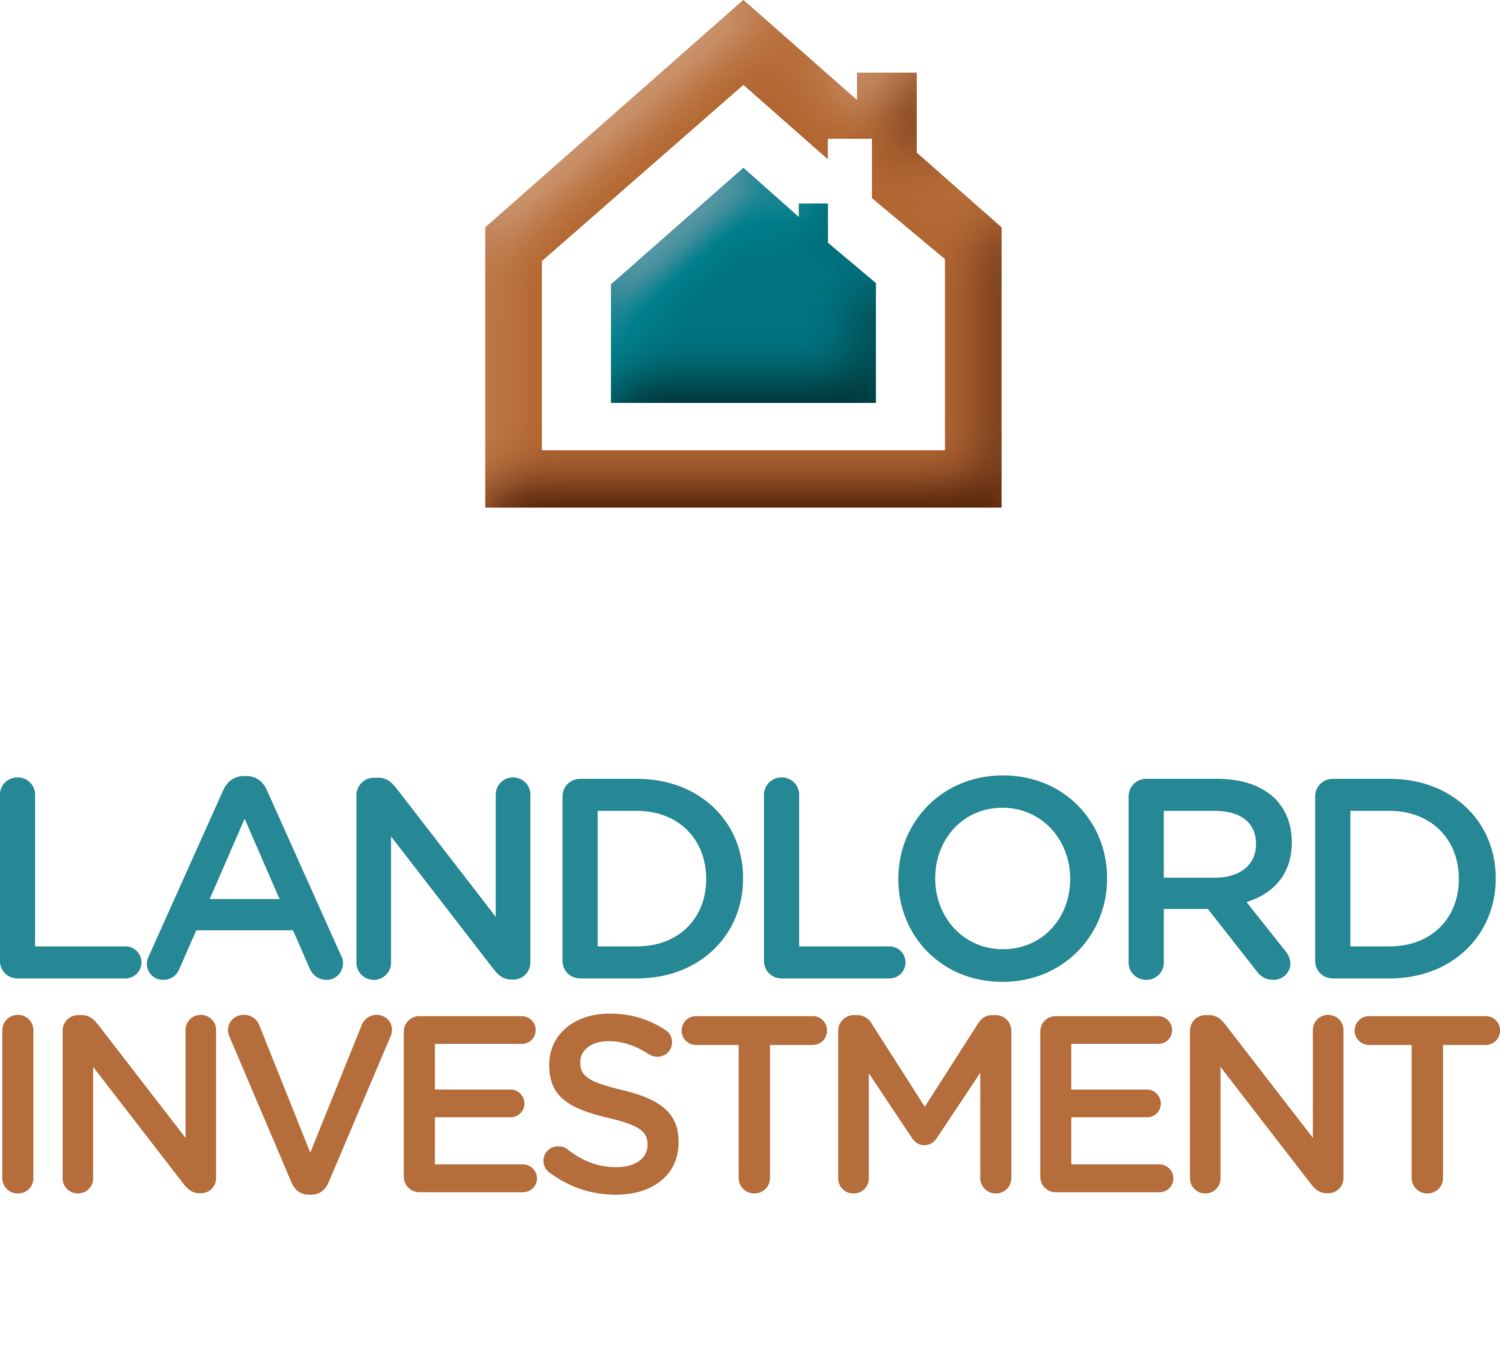 The National Landlord Investment Show - Manchester